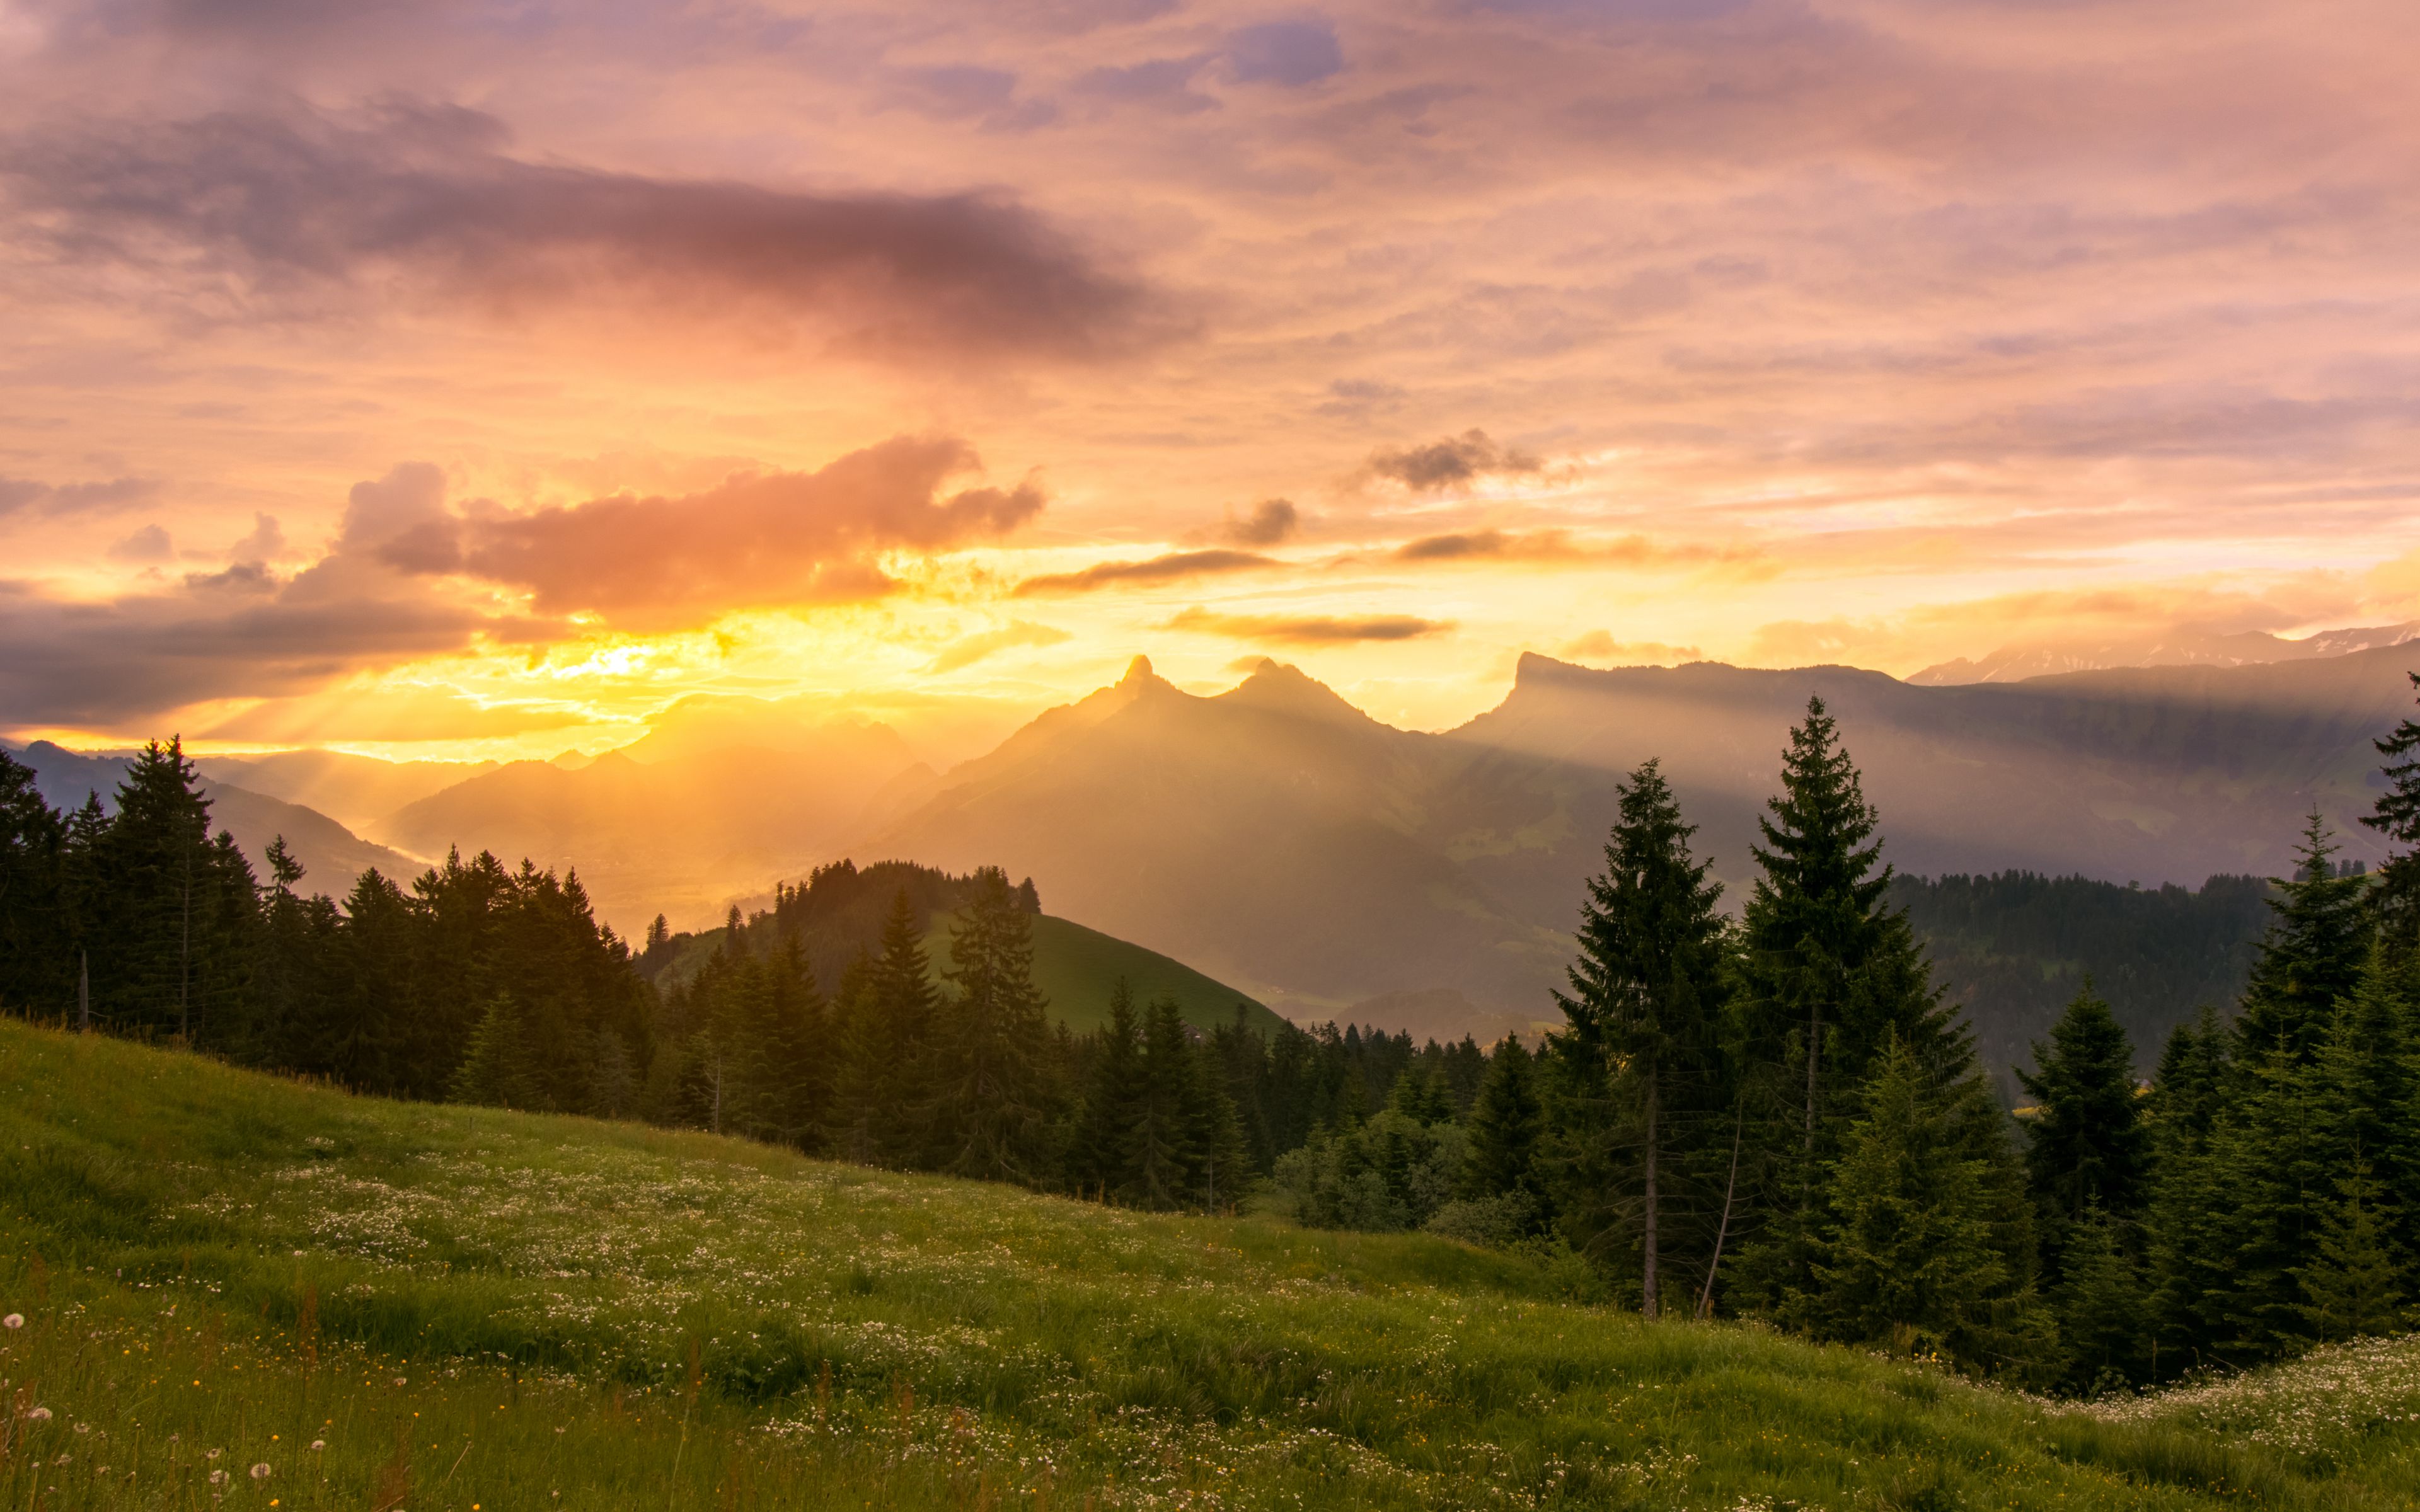 Download Wallpaper 3840x2400 Mountains Sunset Lawn Trees Landscape